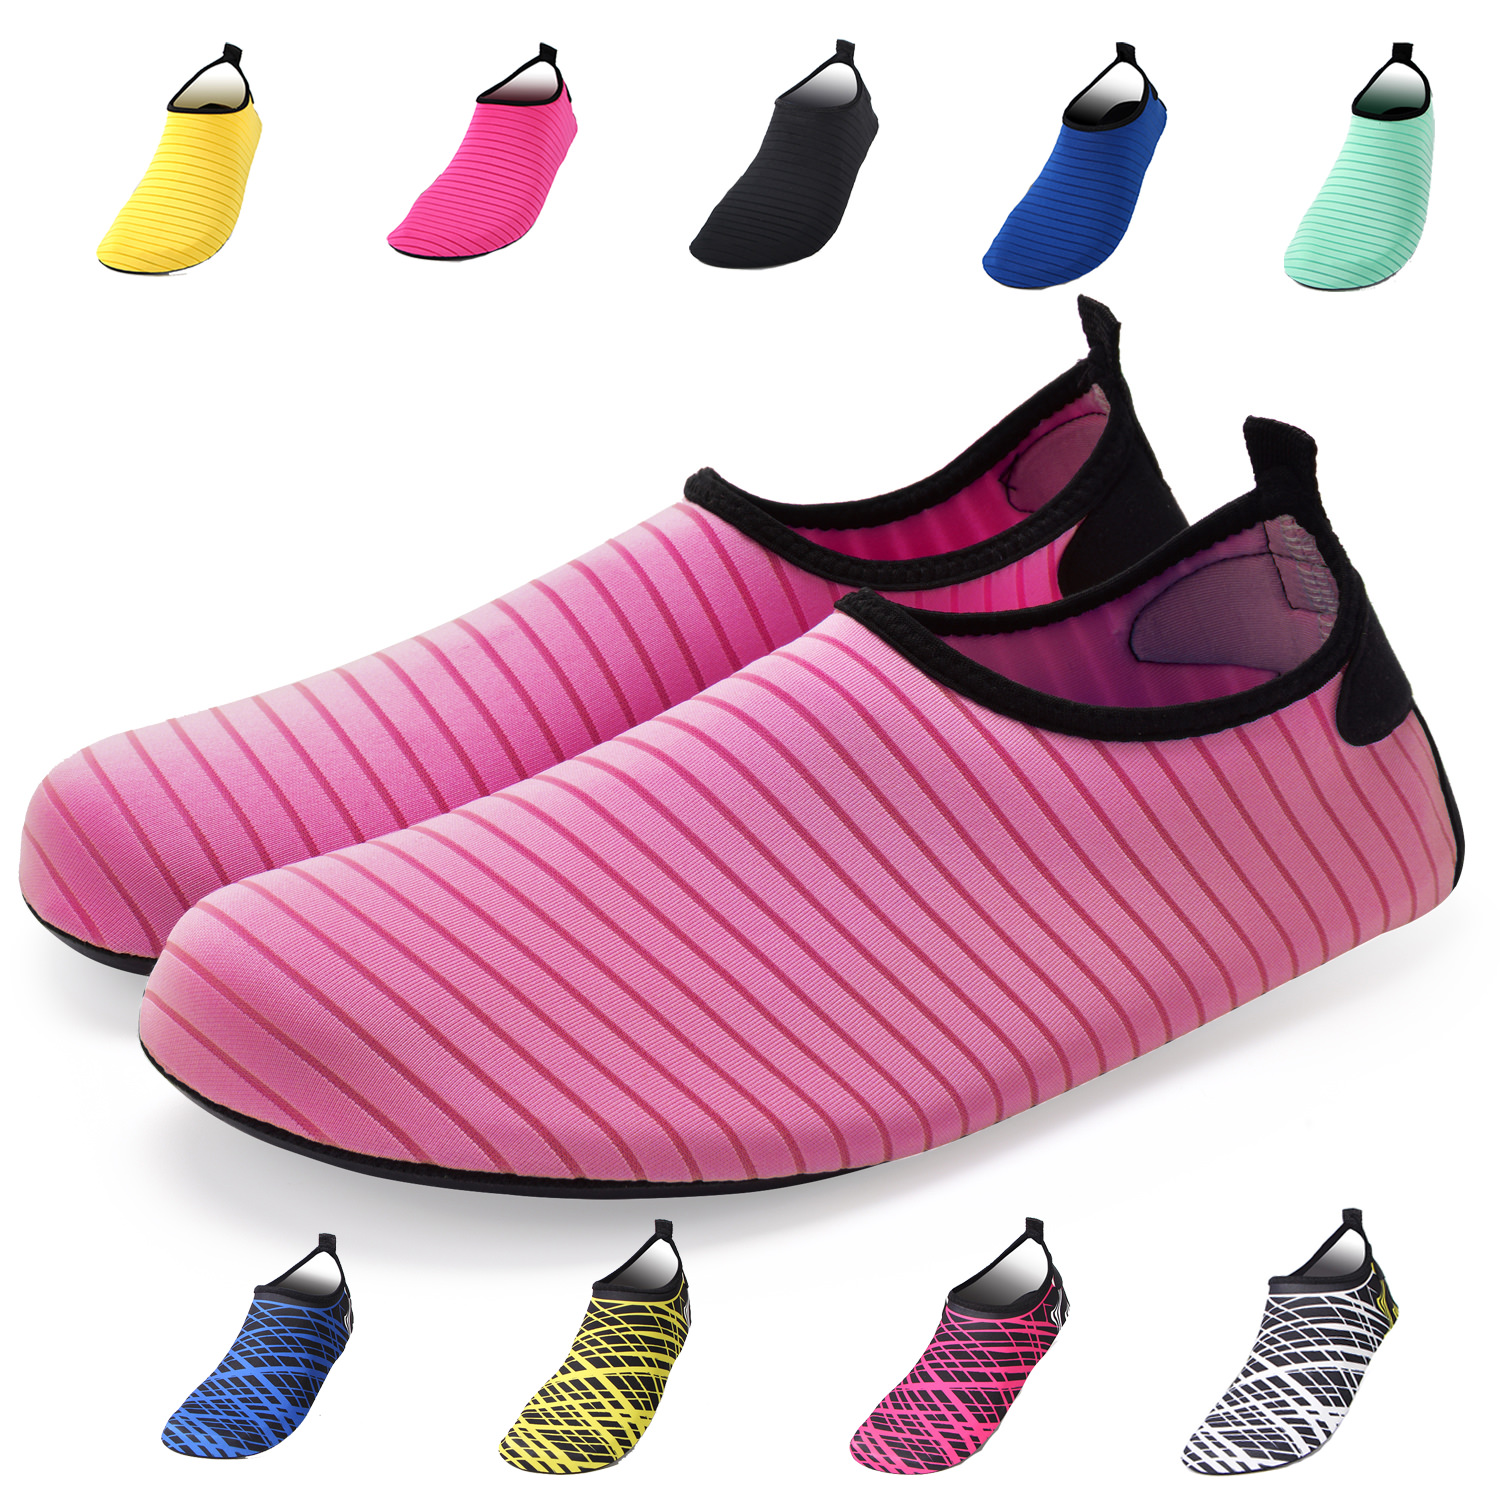 bridawn Water Shoes for Women and Men Quick-Dry Socks Barefoot Shoes